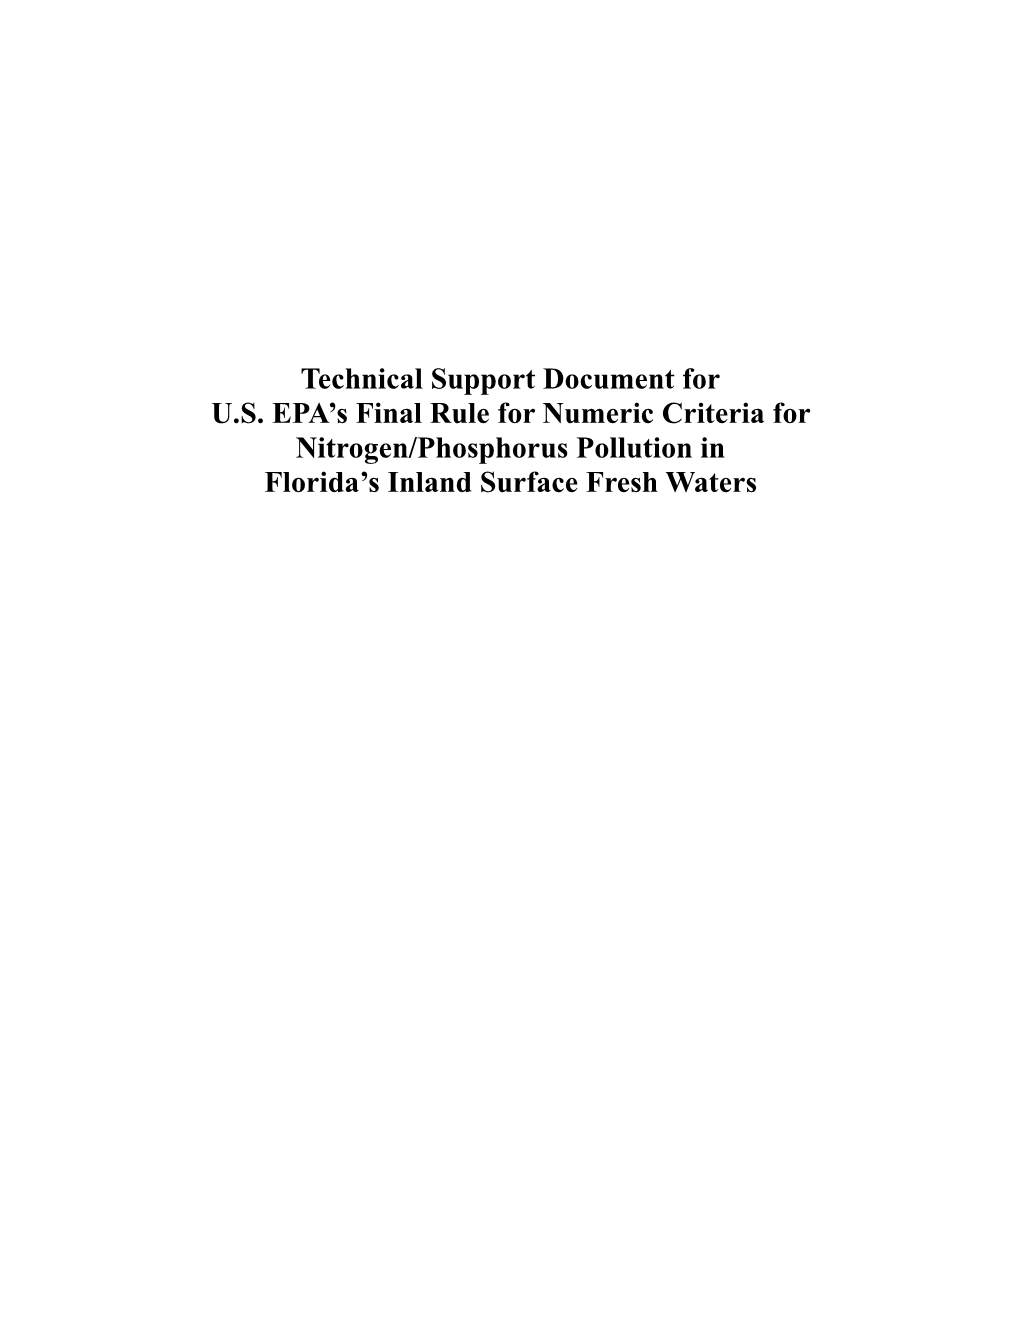 Technical Support Document for U.S. EPA's Final Rule for Numeric